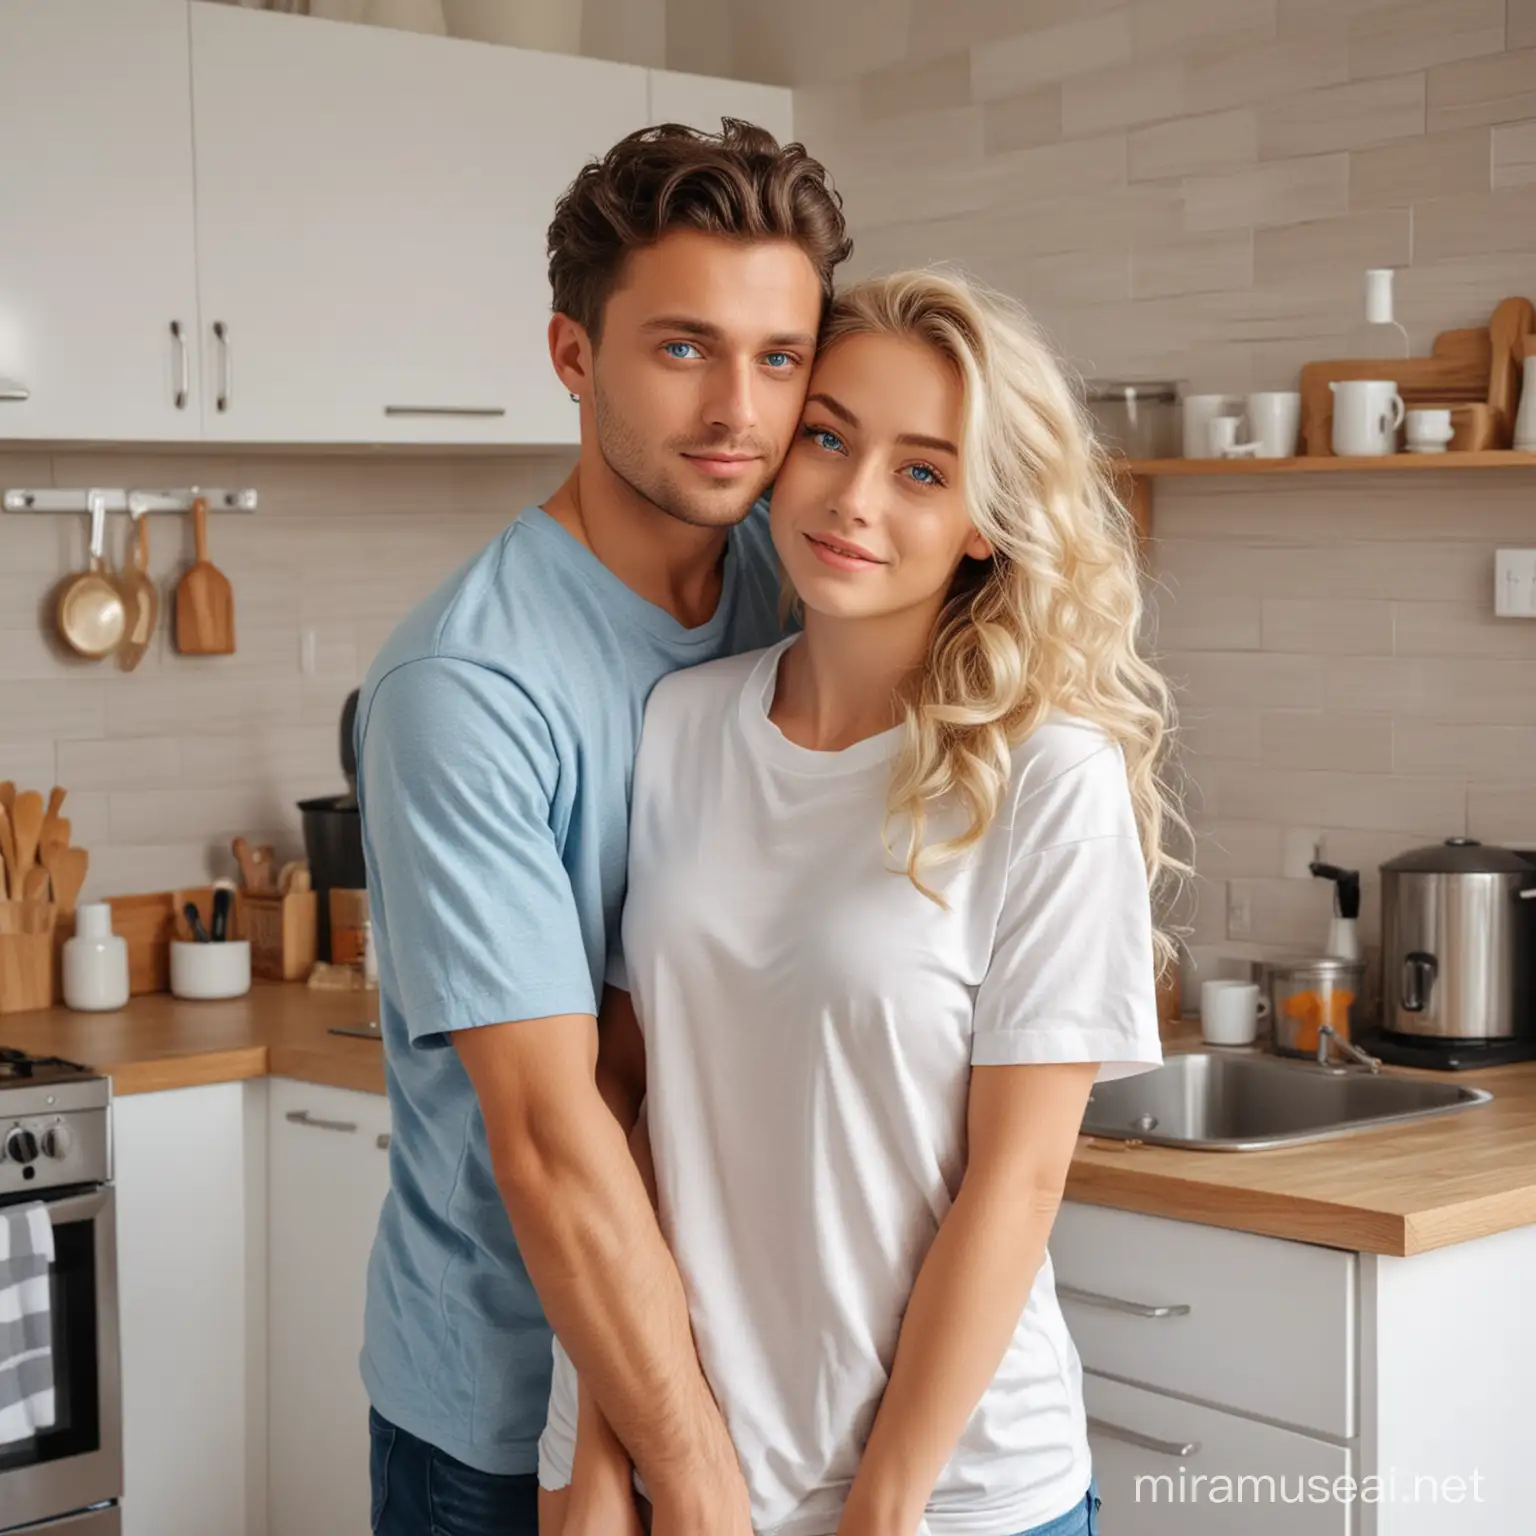 a beautiful girl with blonde hair and blue eyes in a voluminous T-shirt without pants cooks in the kitchen, a guy with dark curly hair hugs her from behind, morning, dear house, dough